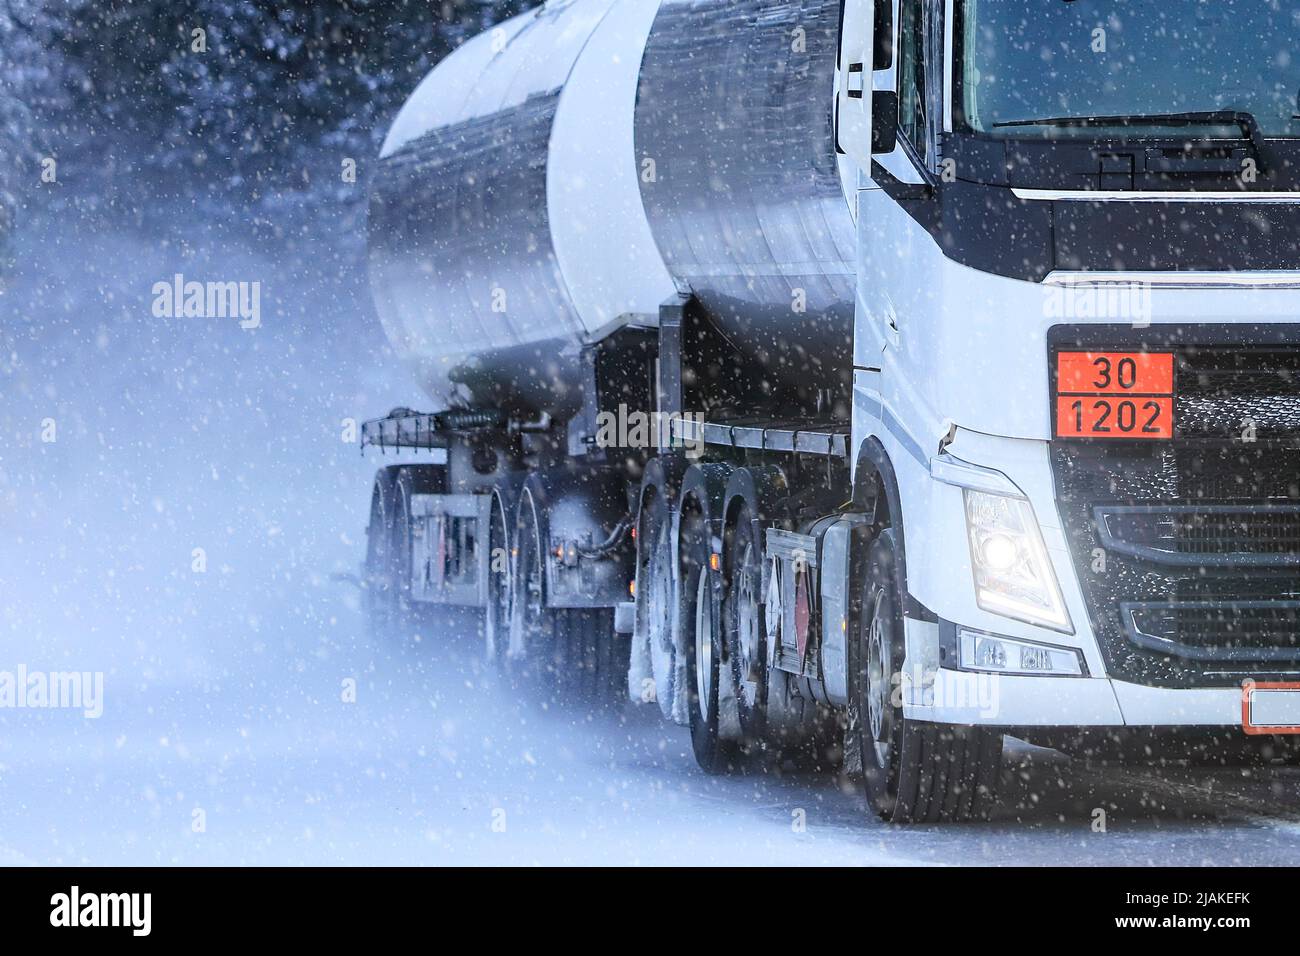 Detail of a white tanker truck transporting diesel oil, ADR 30-1202, along road in heavy snowfall. Stock Photo